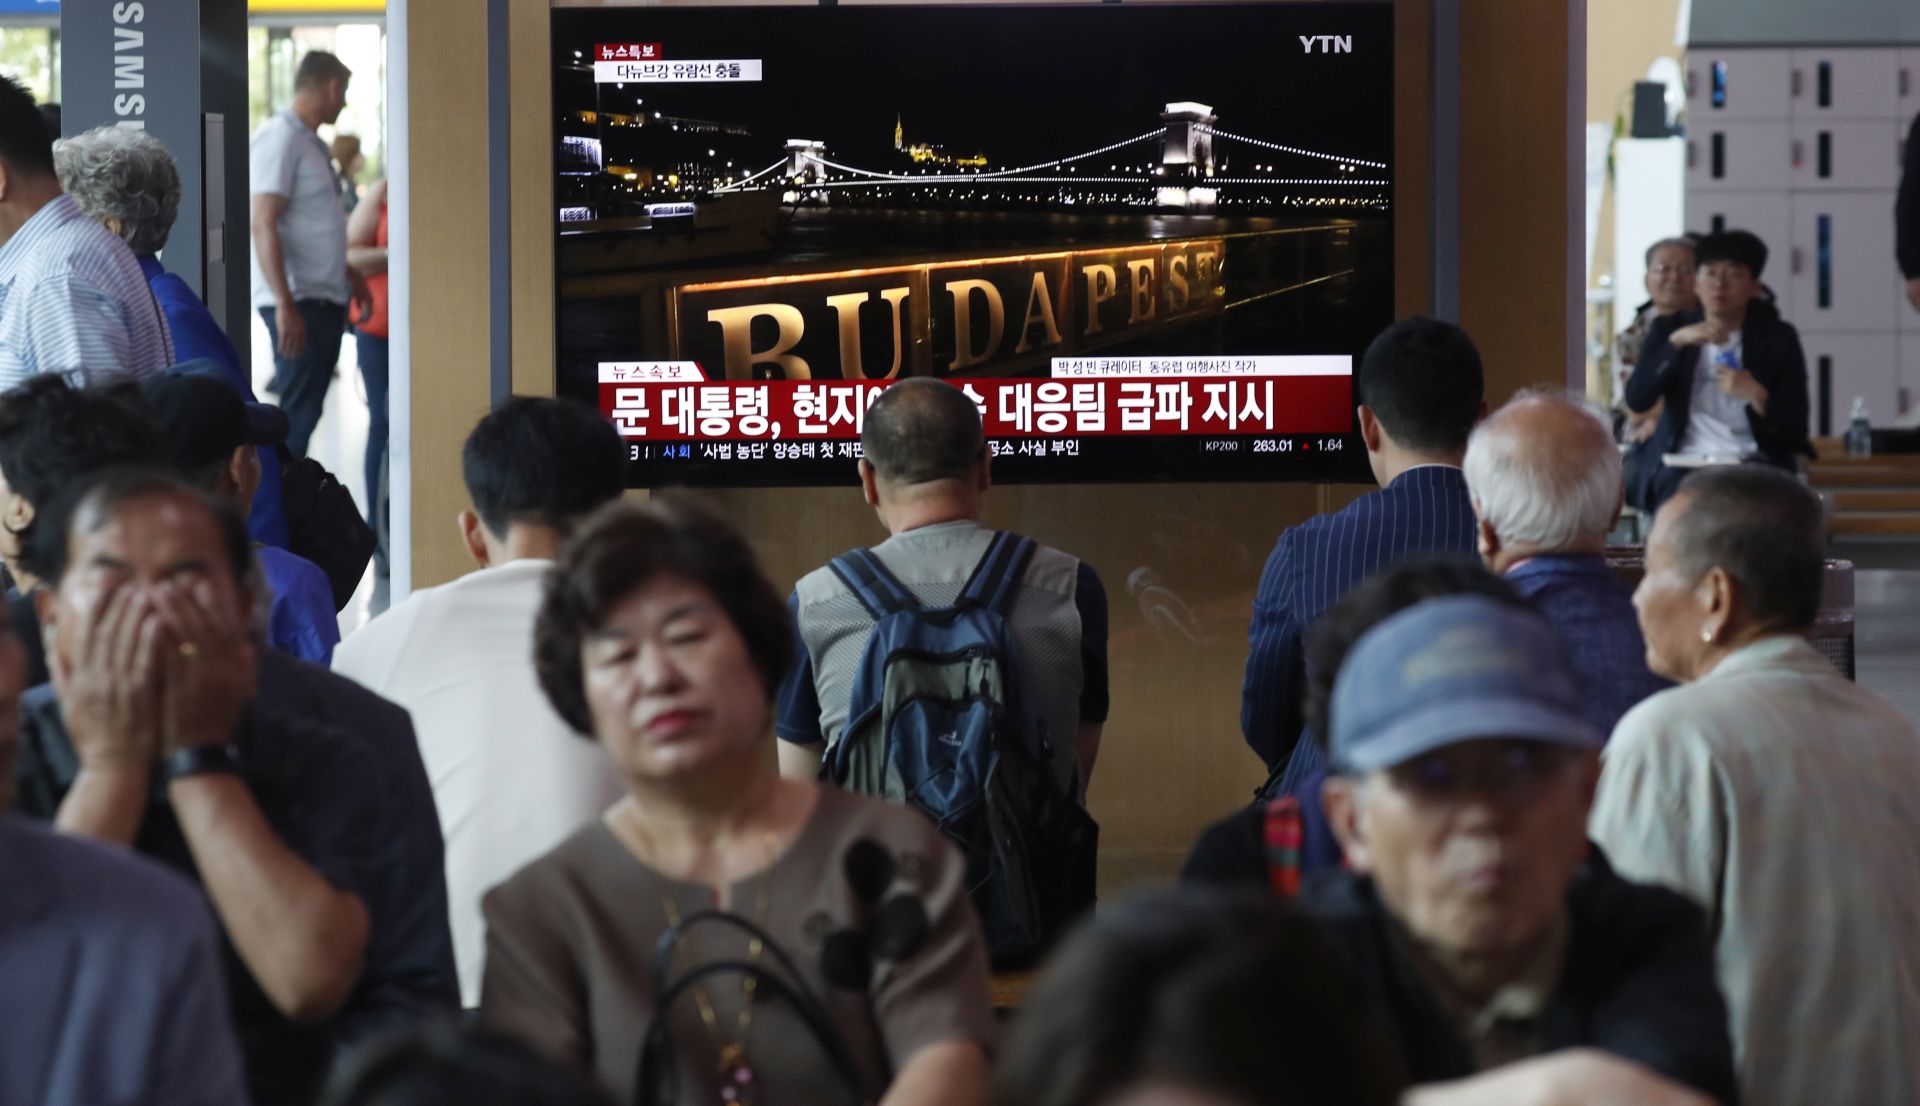 epa07611602 South Korean people watch breaking news on television at Seoul Station in Seoul, South Korea, 30 May 2019. According to the South Korea foreign ministry, seven South Korean citizens were killed and are 19 missing after the tourist boat crashed in the river Danube in Budapest, Hungary late 29 May (local time).  EPA/JEON HEON-KYUN